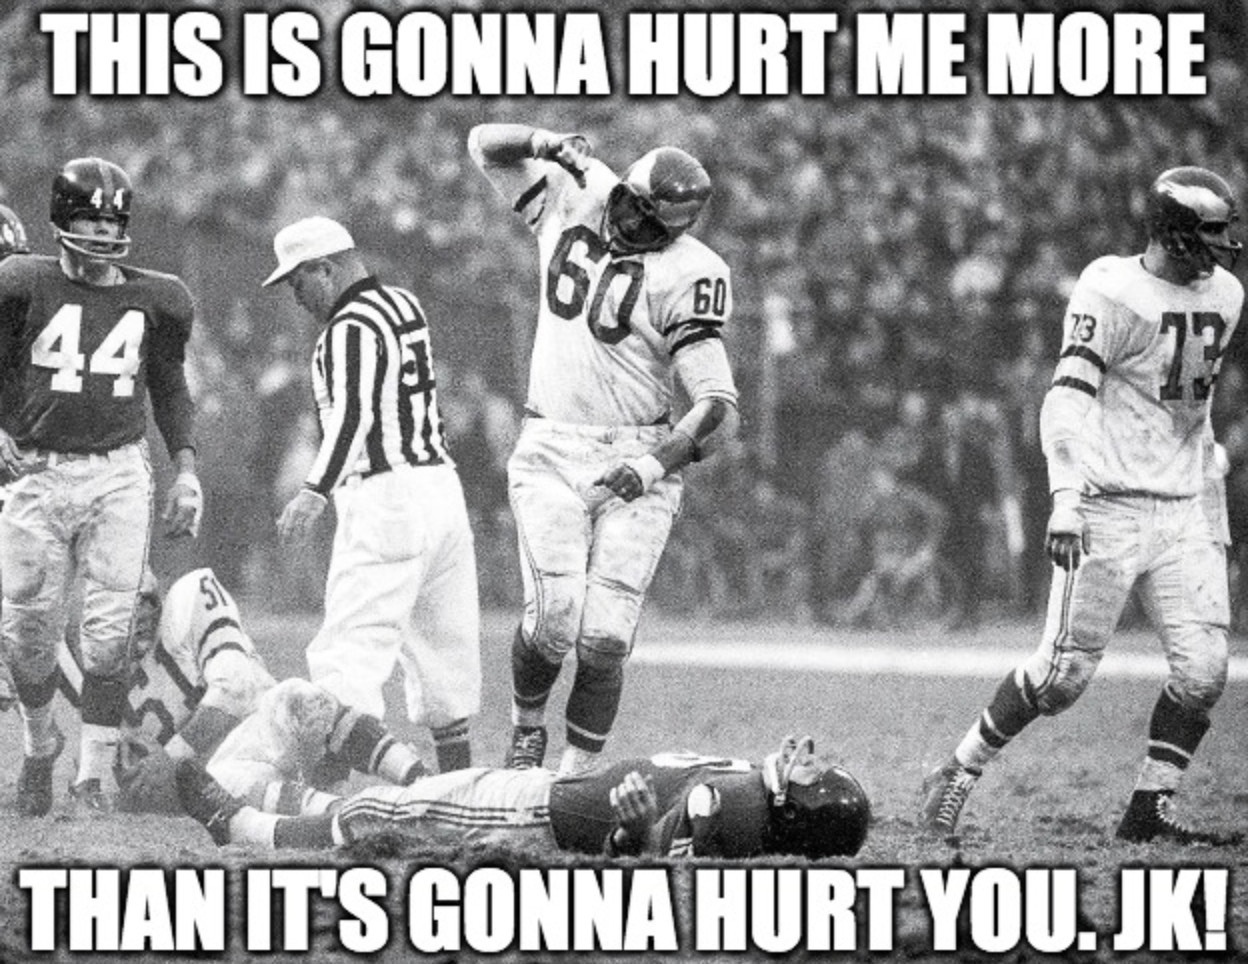 Funny Sports Memes That Will Keep You Laughing | Stadium Talk